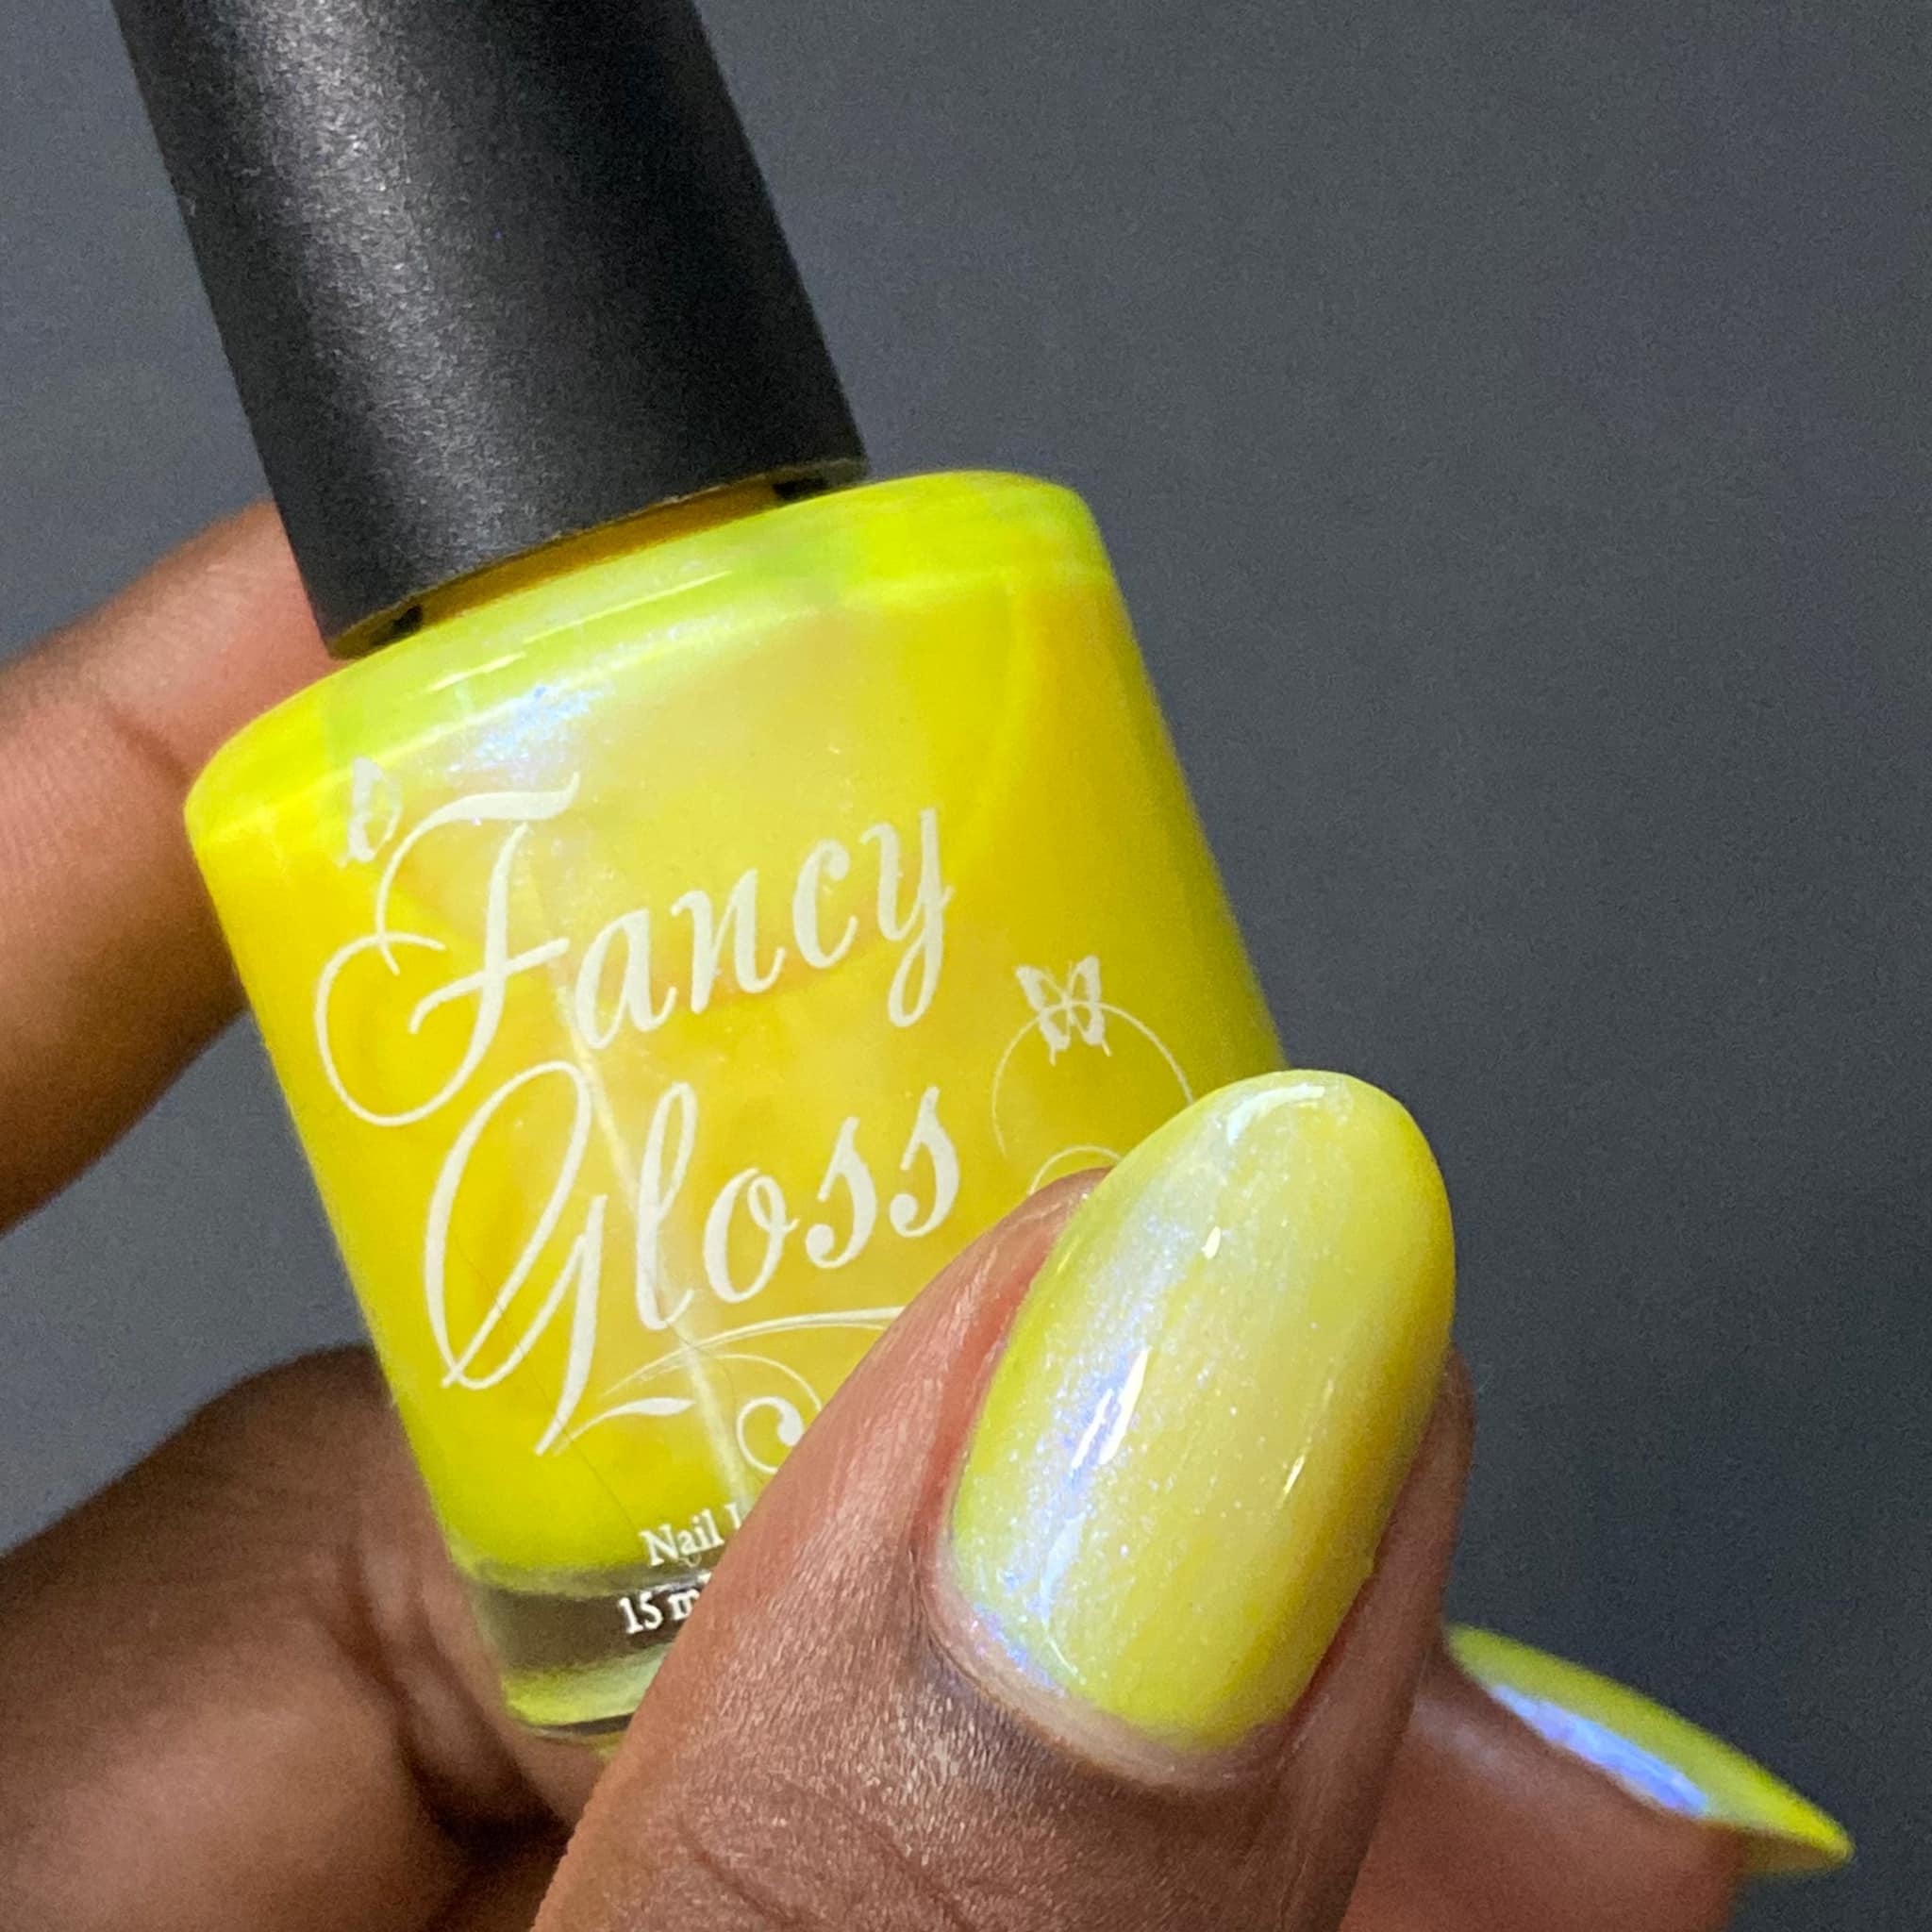 Glowing Canary